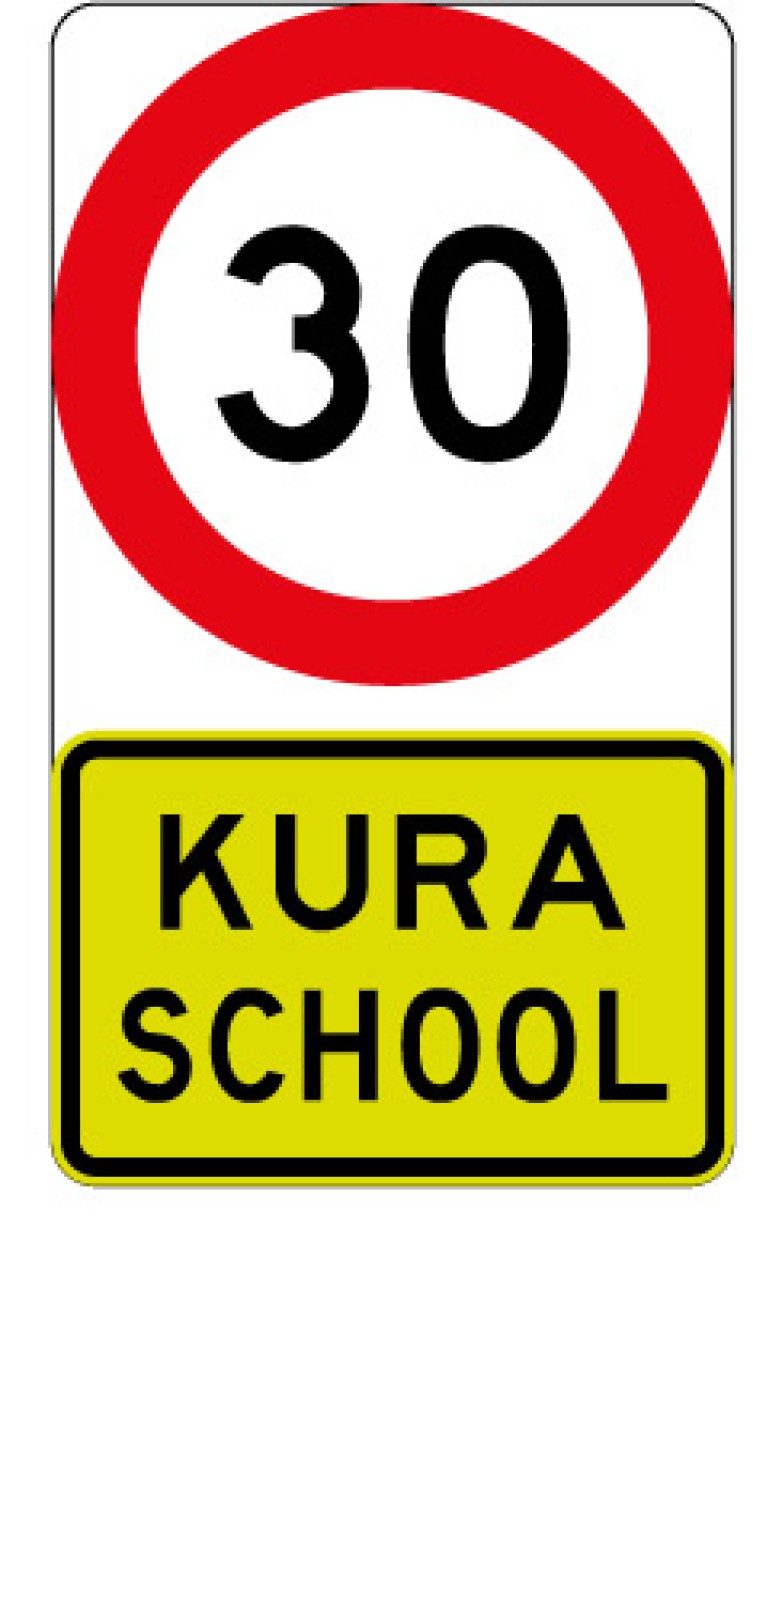 New RS62 Kura School Speed Limit Sign - This sign can be used from 19 May 2022